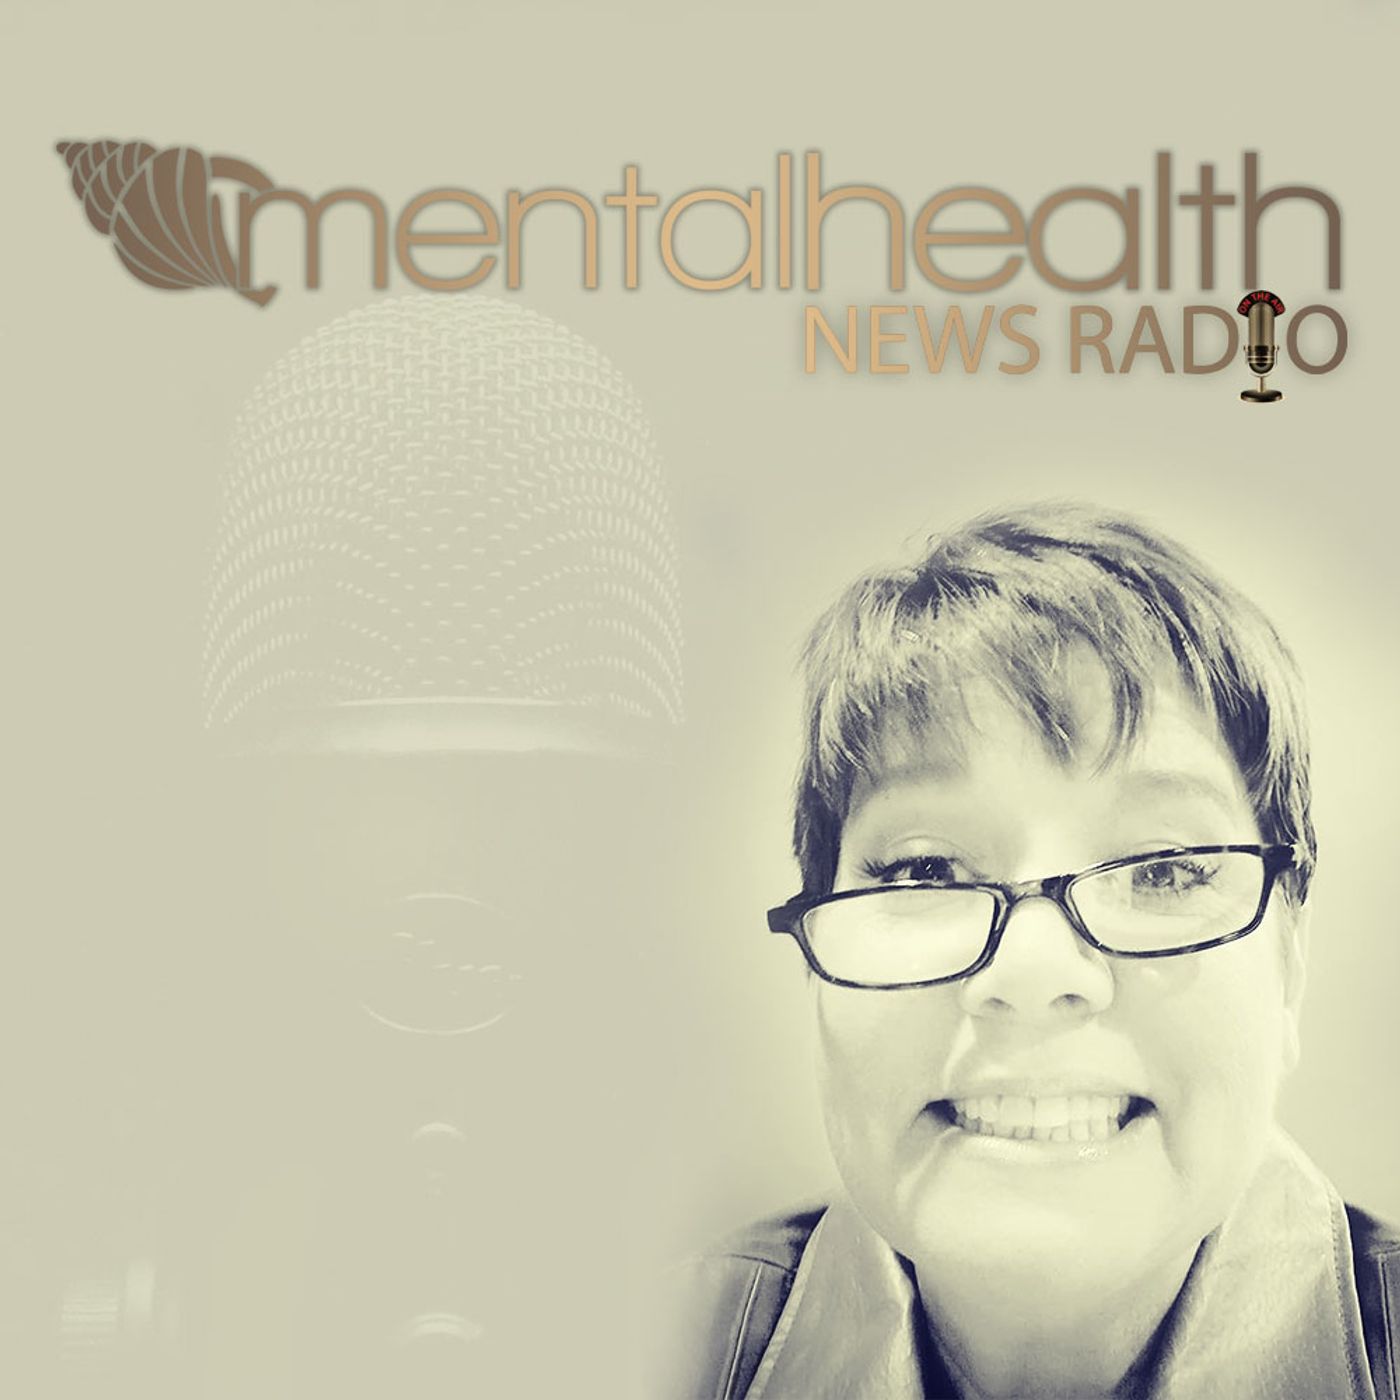 Mental Health News Radio - Roundtable with Dr. Paul Meier: The First Six Years of Life on Personality Development